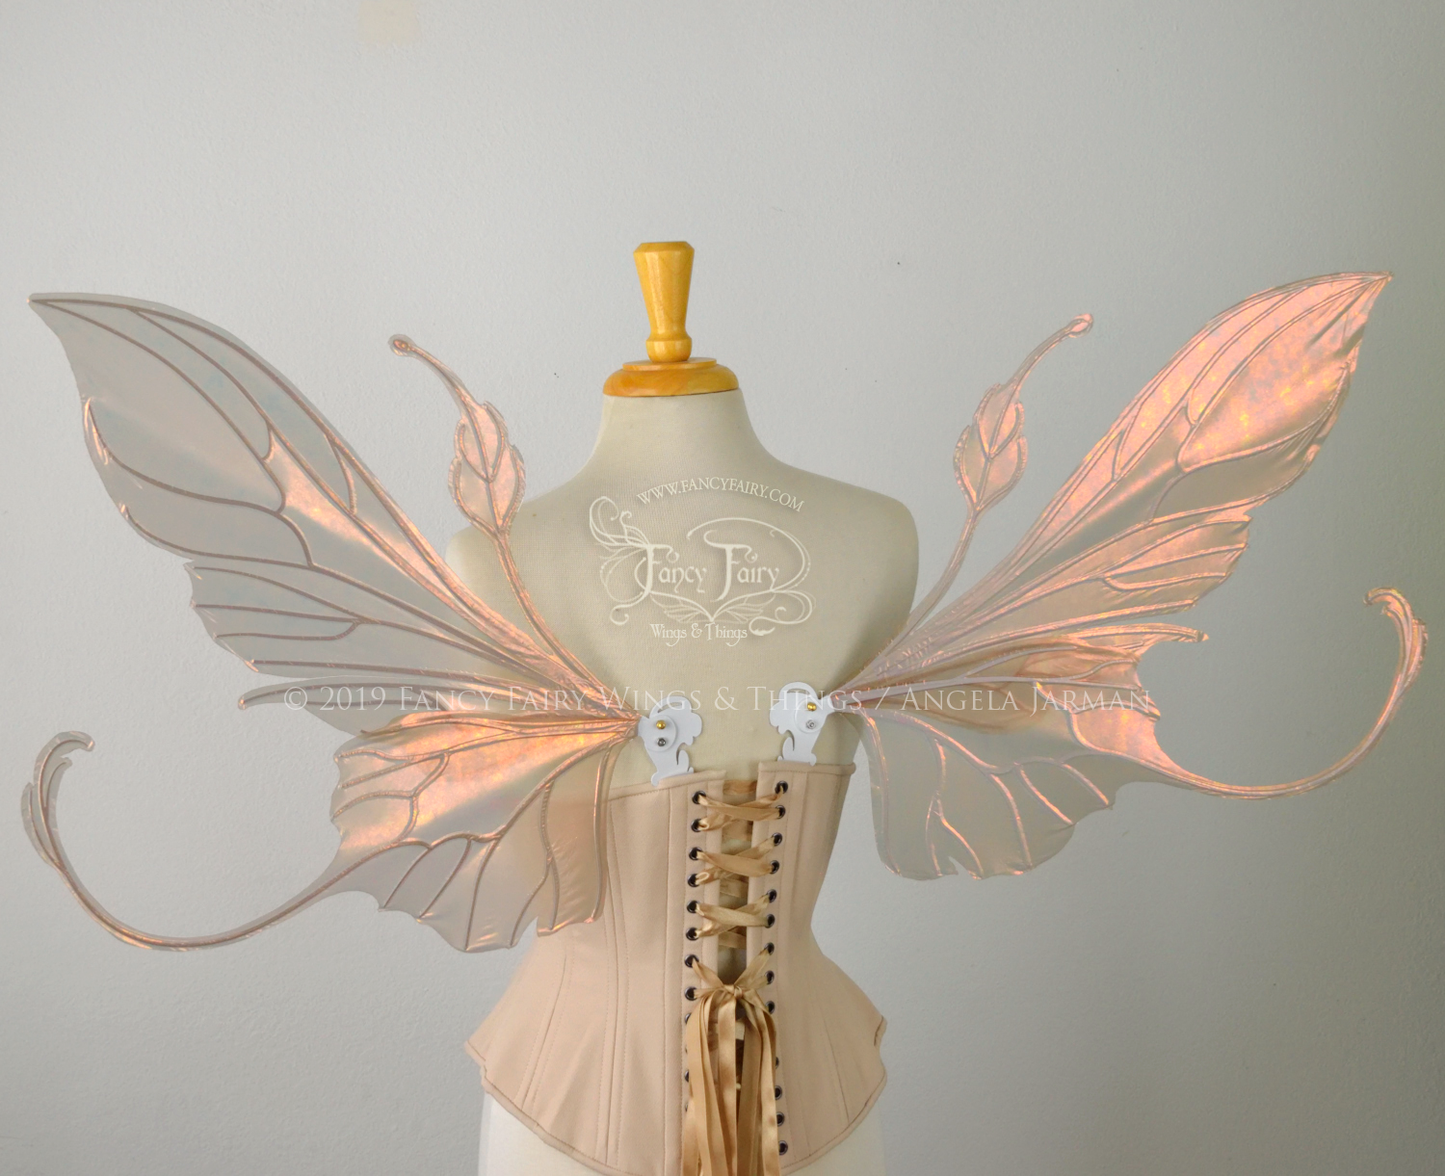 Elvina Iridescent Convertible Fairy Wings in Rose Gold with Pearl White veins